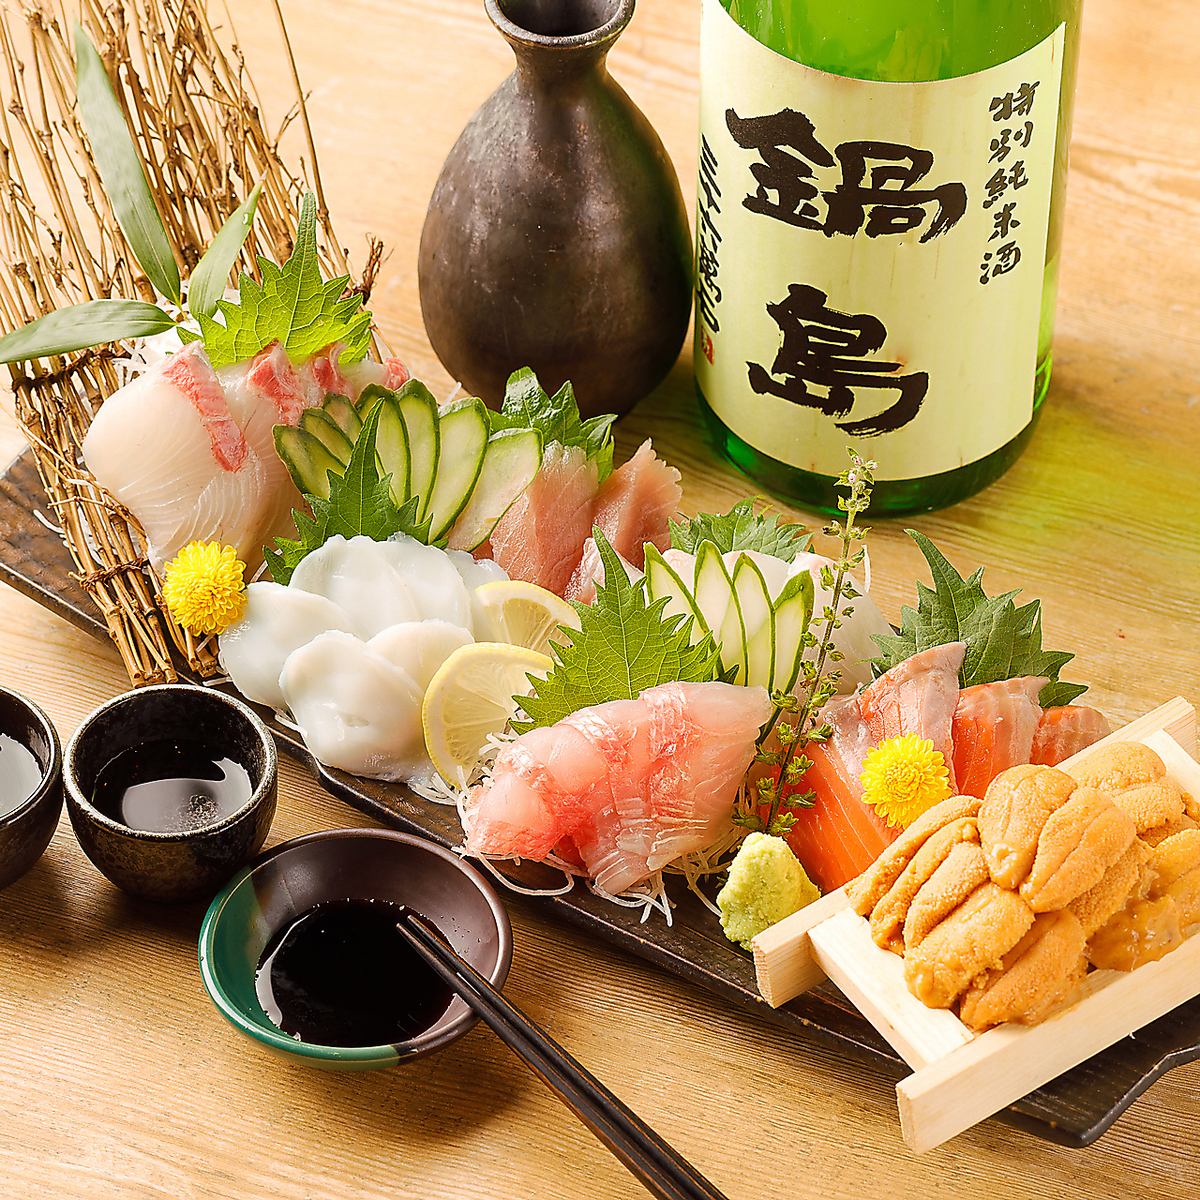 [Currently in preparation] All-you-can-eat Otoshi Oden for 500 yen!!